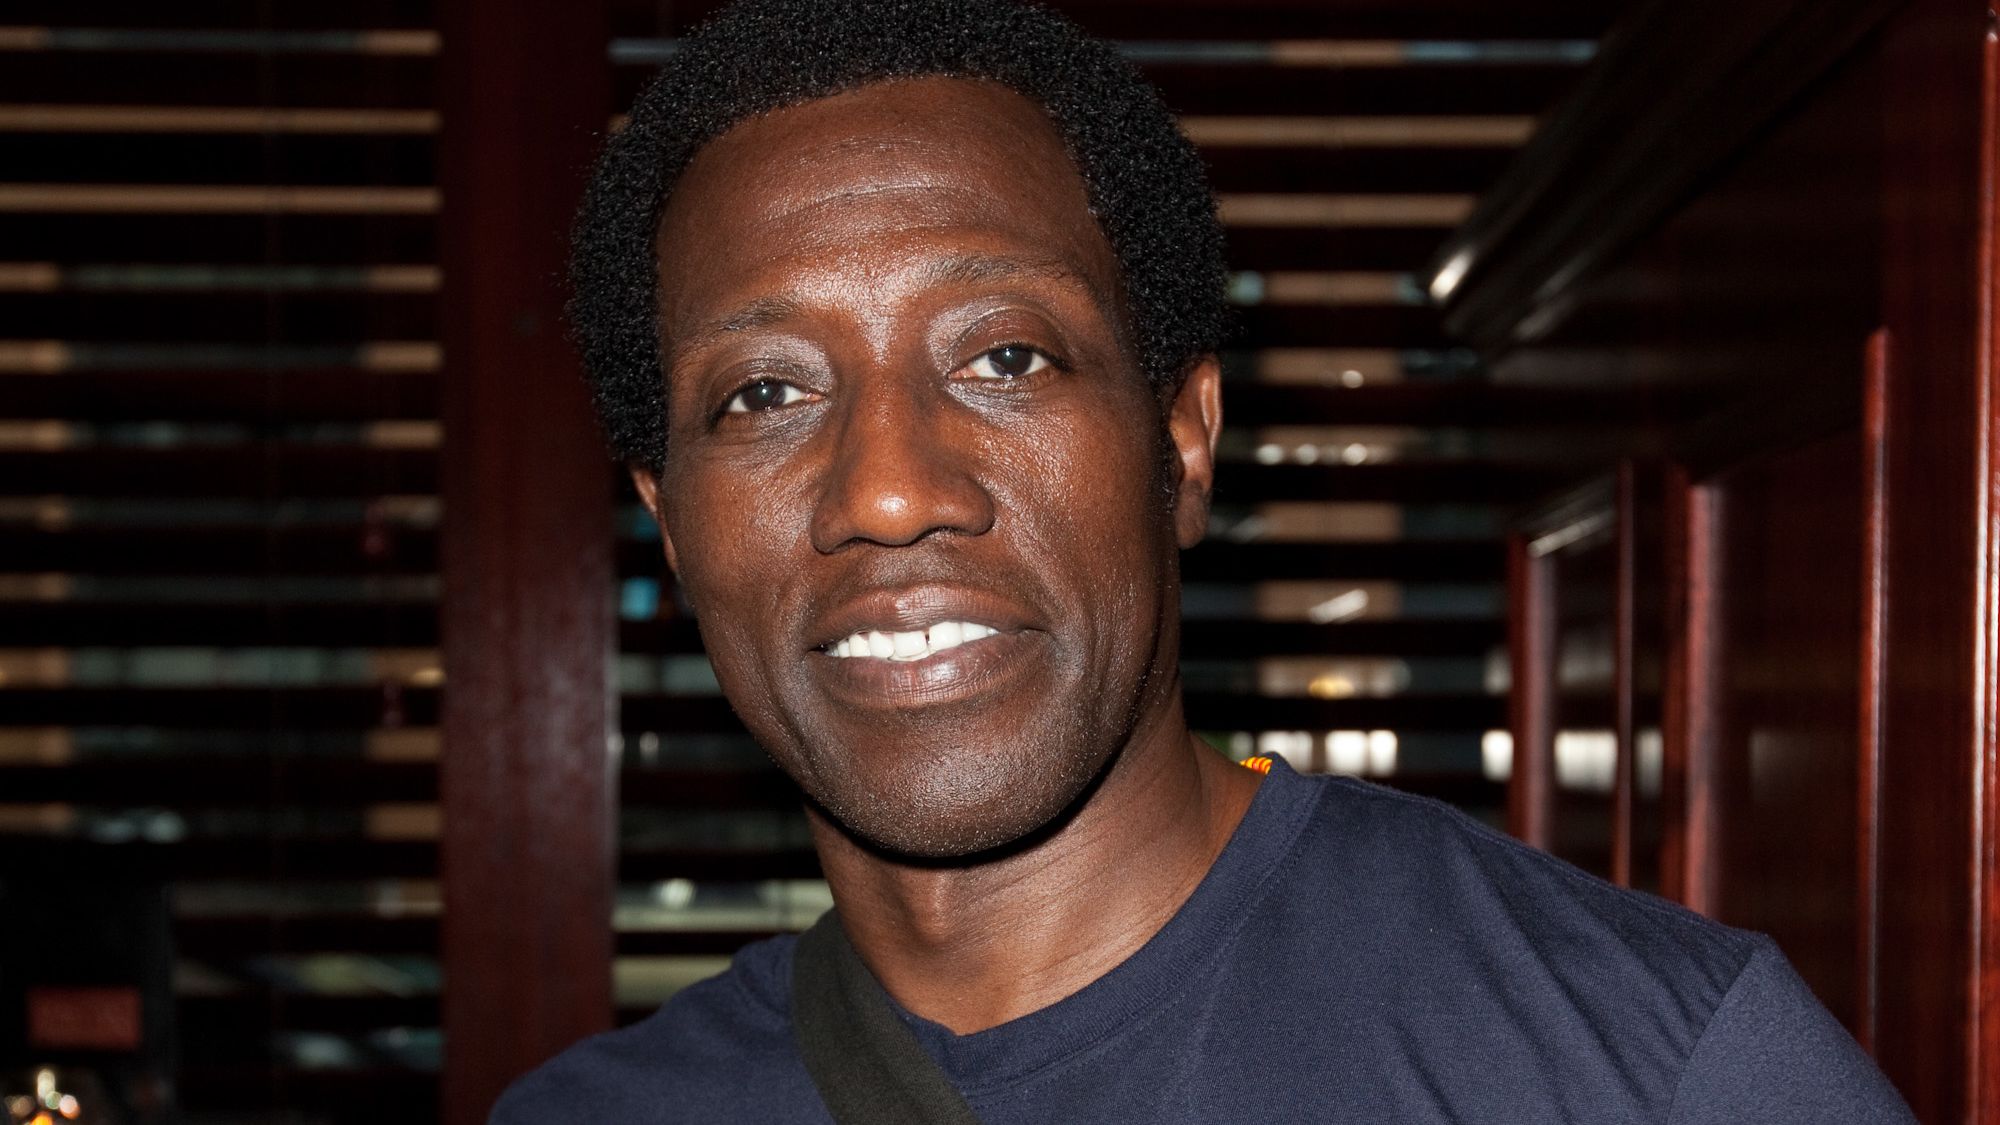 Wesley Snipes in 2010, the year he was convicted on tax charges.